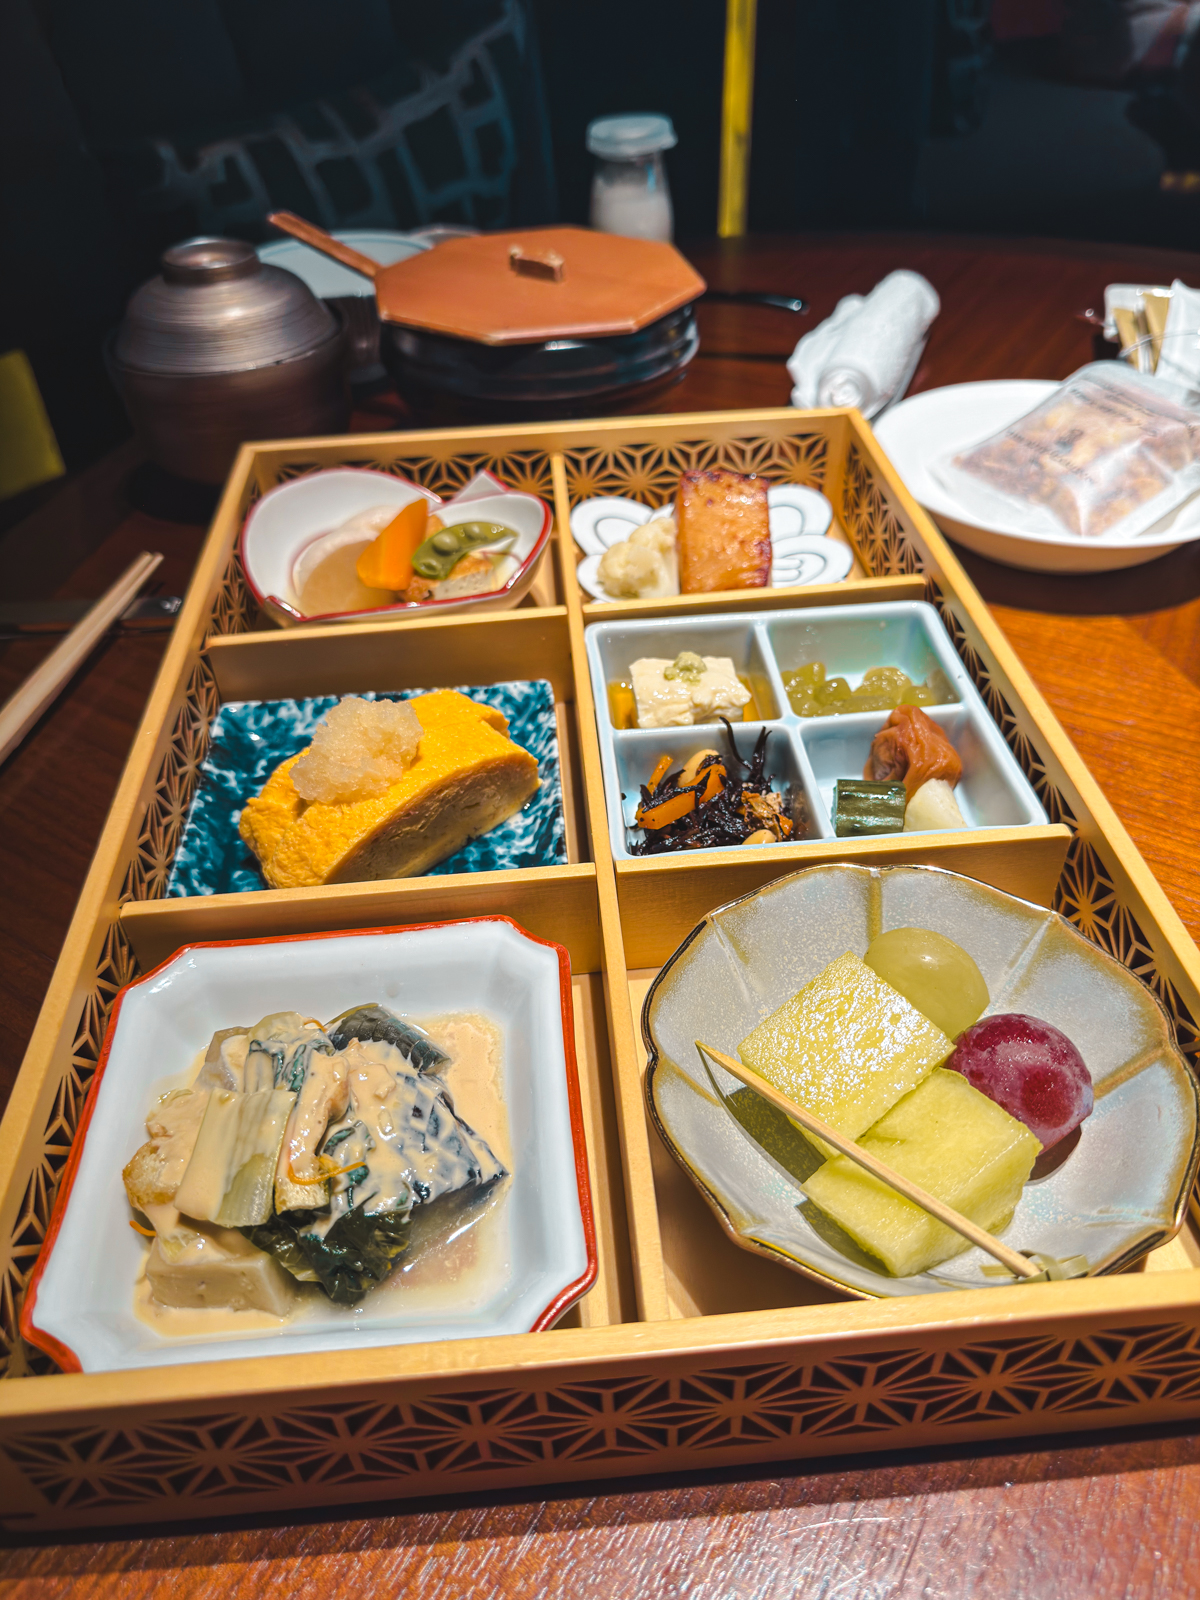 Japanese set menu box with 6 squares featuring fruits, egg, pickles, grilled fish, tofu, and congee bowl.